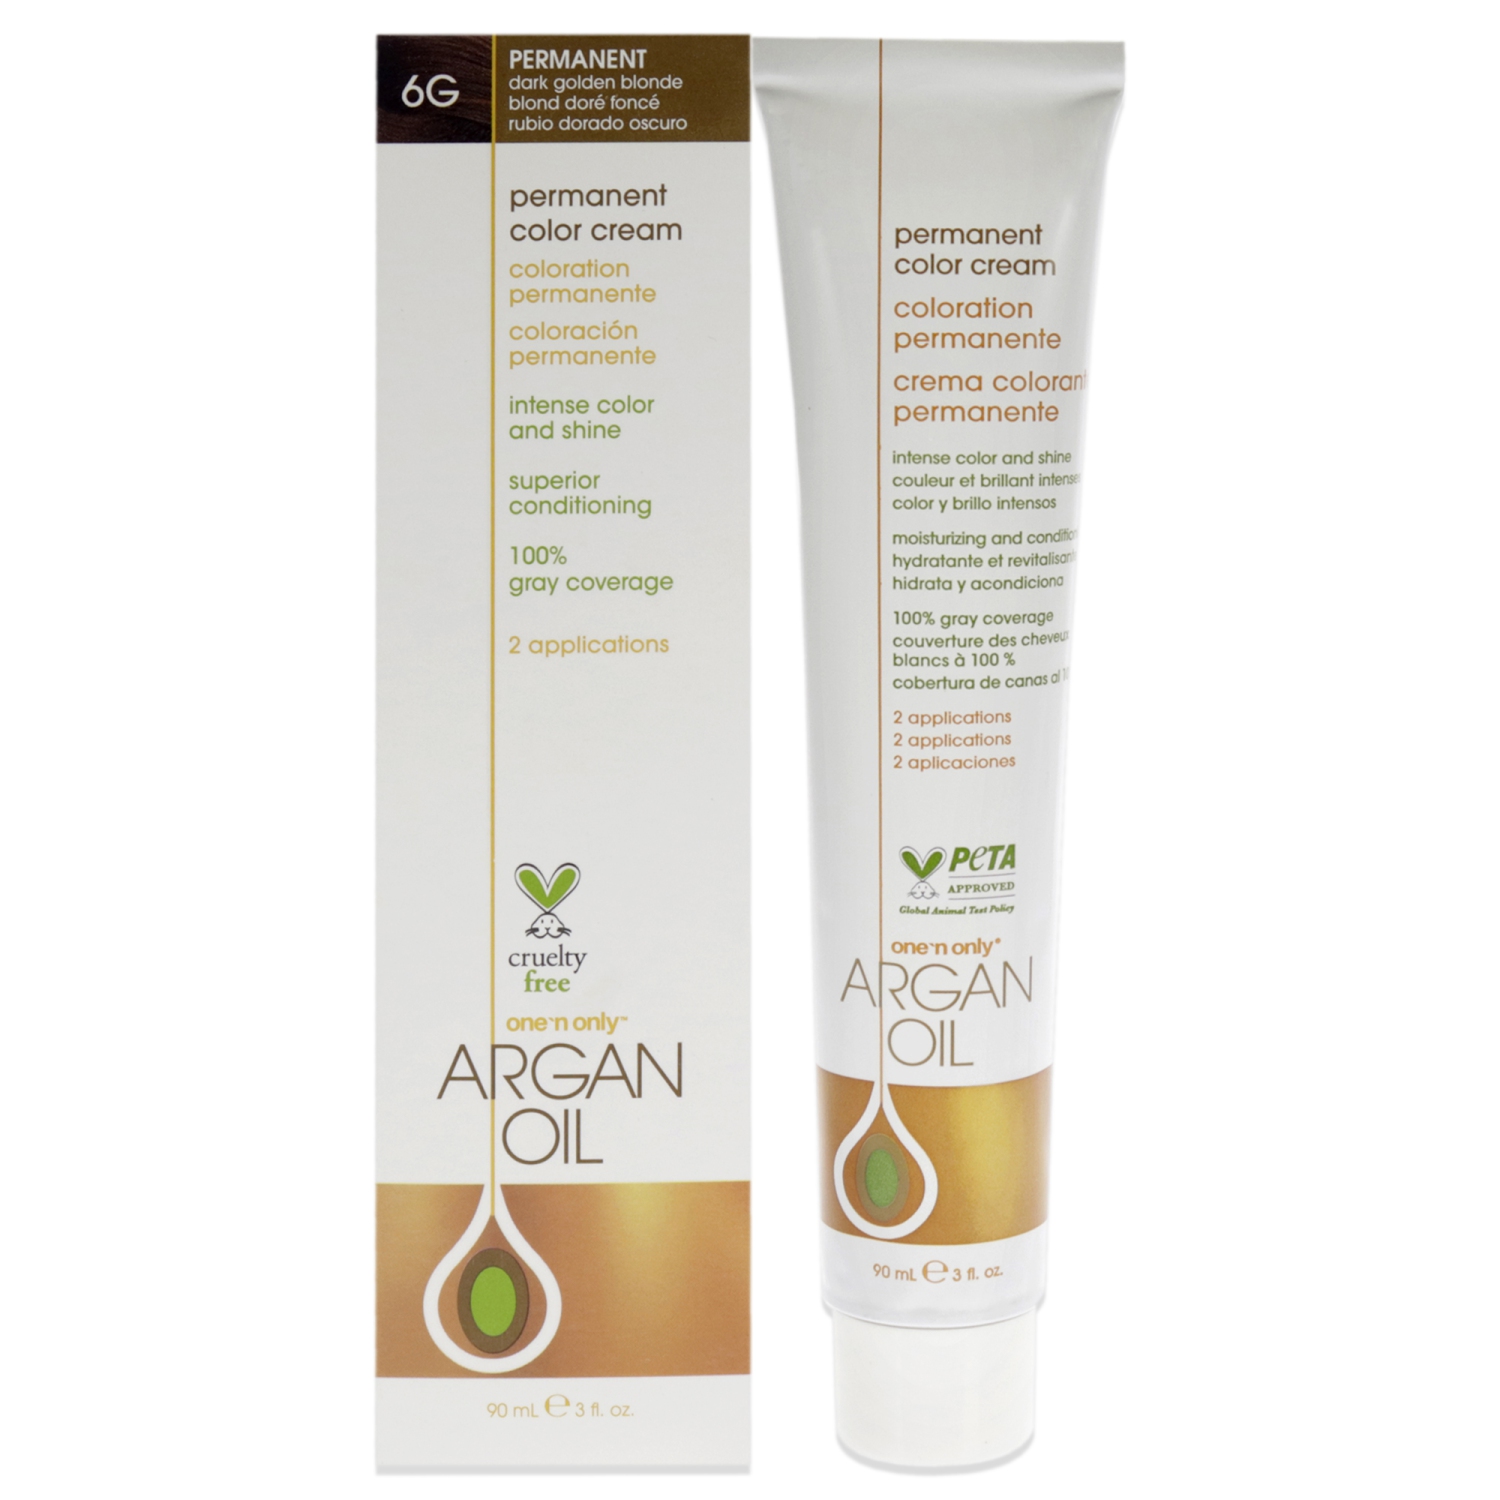 Argan Oil Permanent Color Cream - 6G Dark Golden Blonde by One n Only for Unisex - 3 oz Hair Color